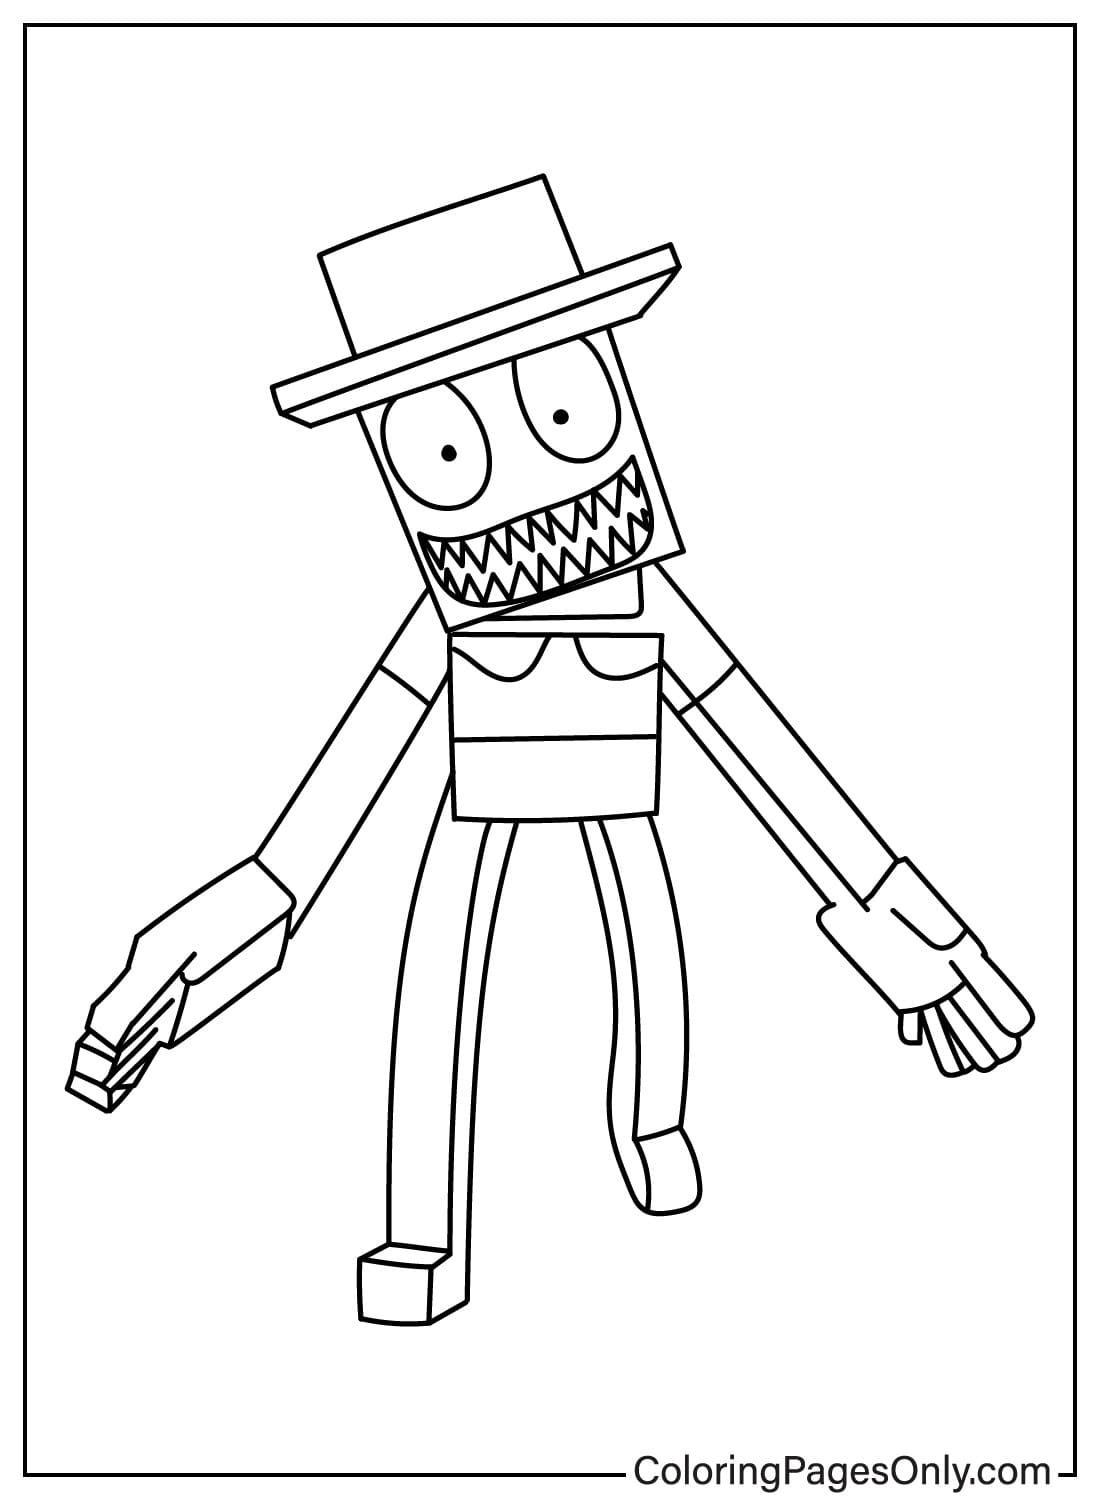 Images Zoonomaly Coloring Page from Zoonomaly